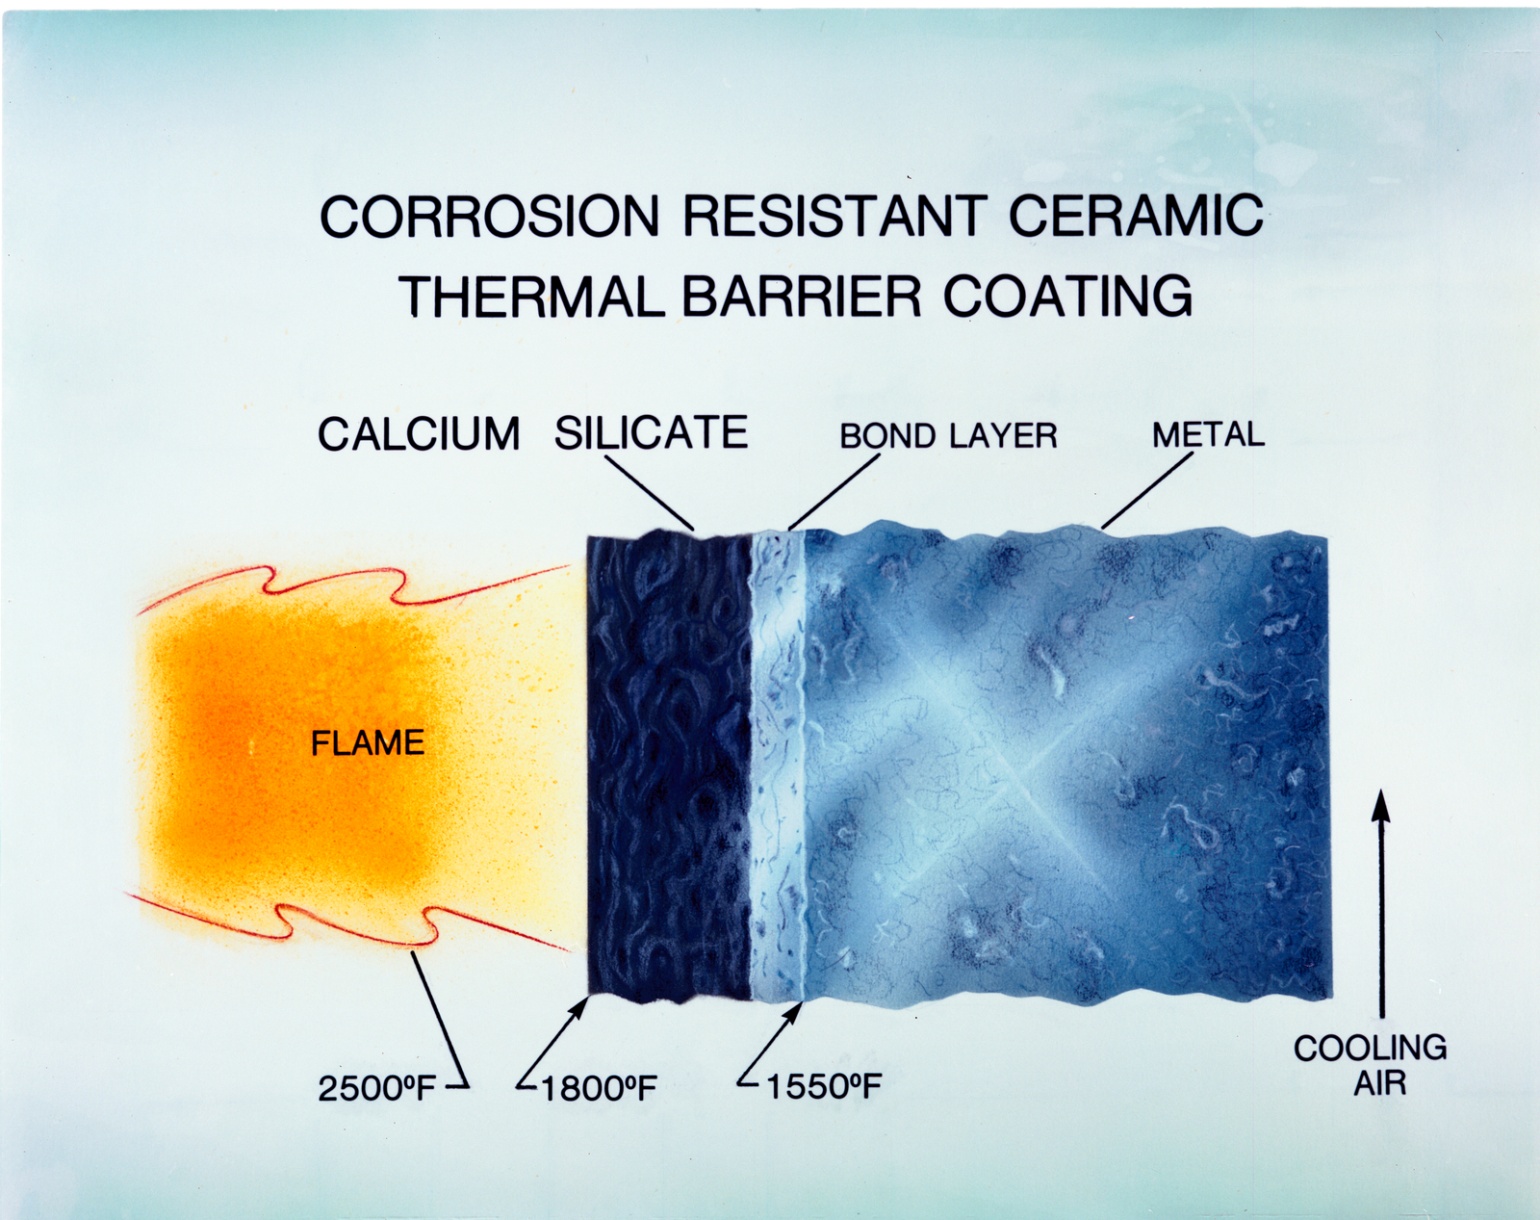 C:\Users\DELL\Downloads\corrosion-resistant-ceramic-thermal-barrier-coating-acf3ad-1600.jpg